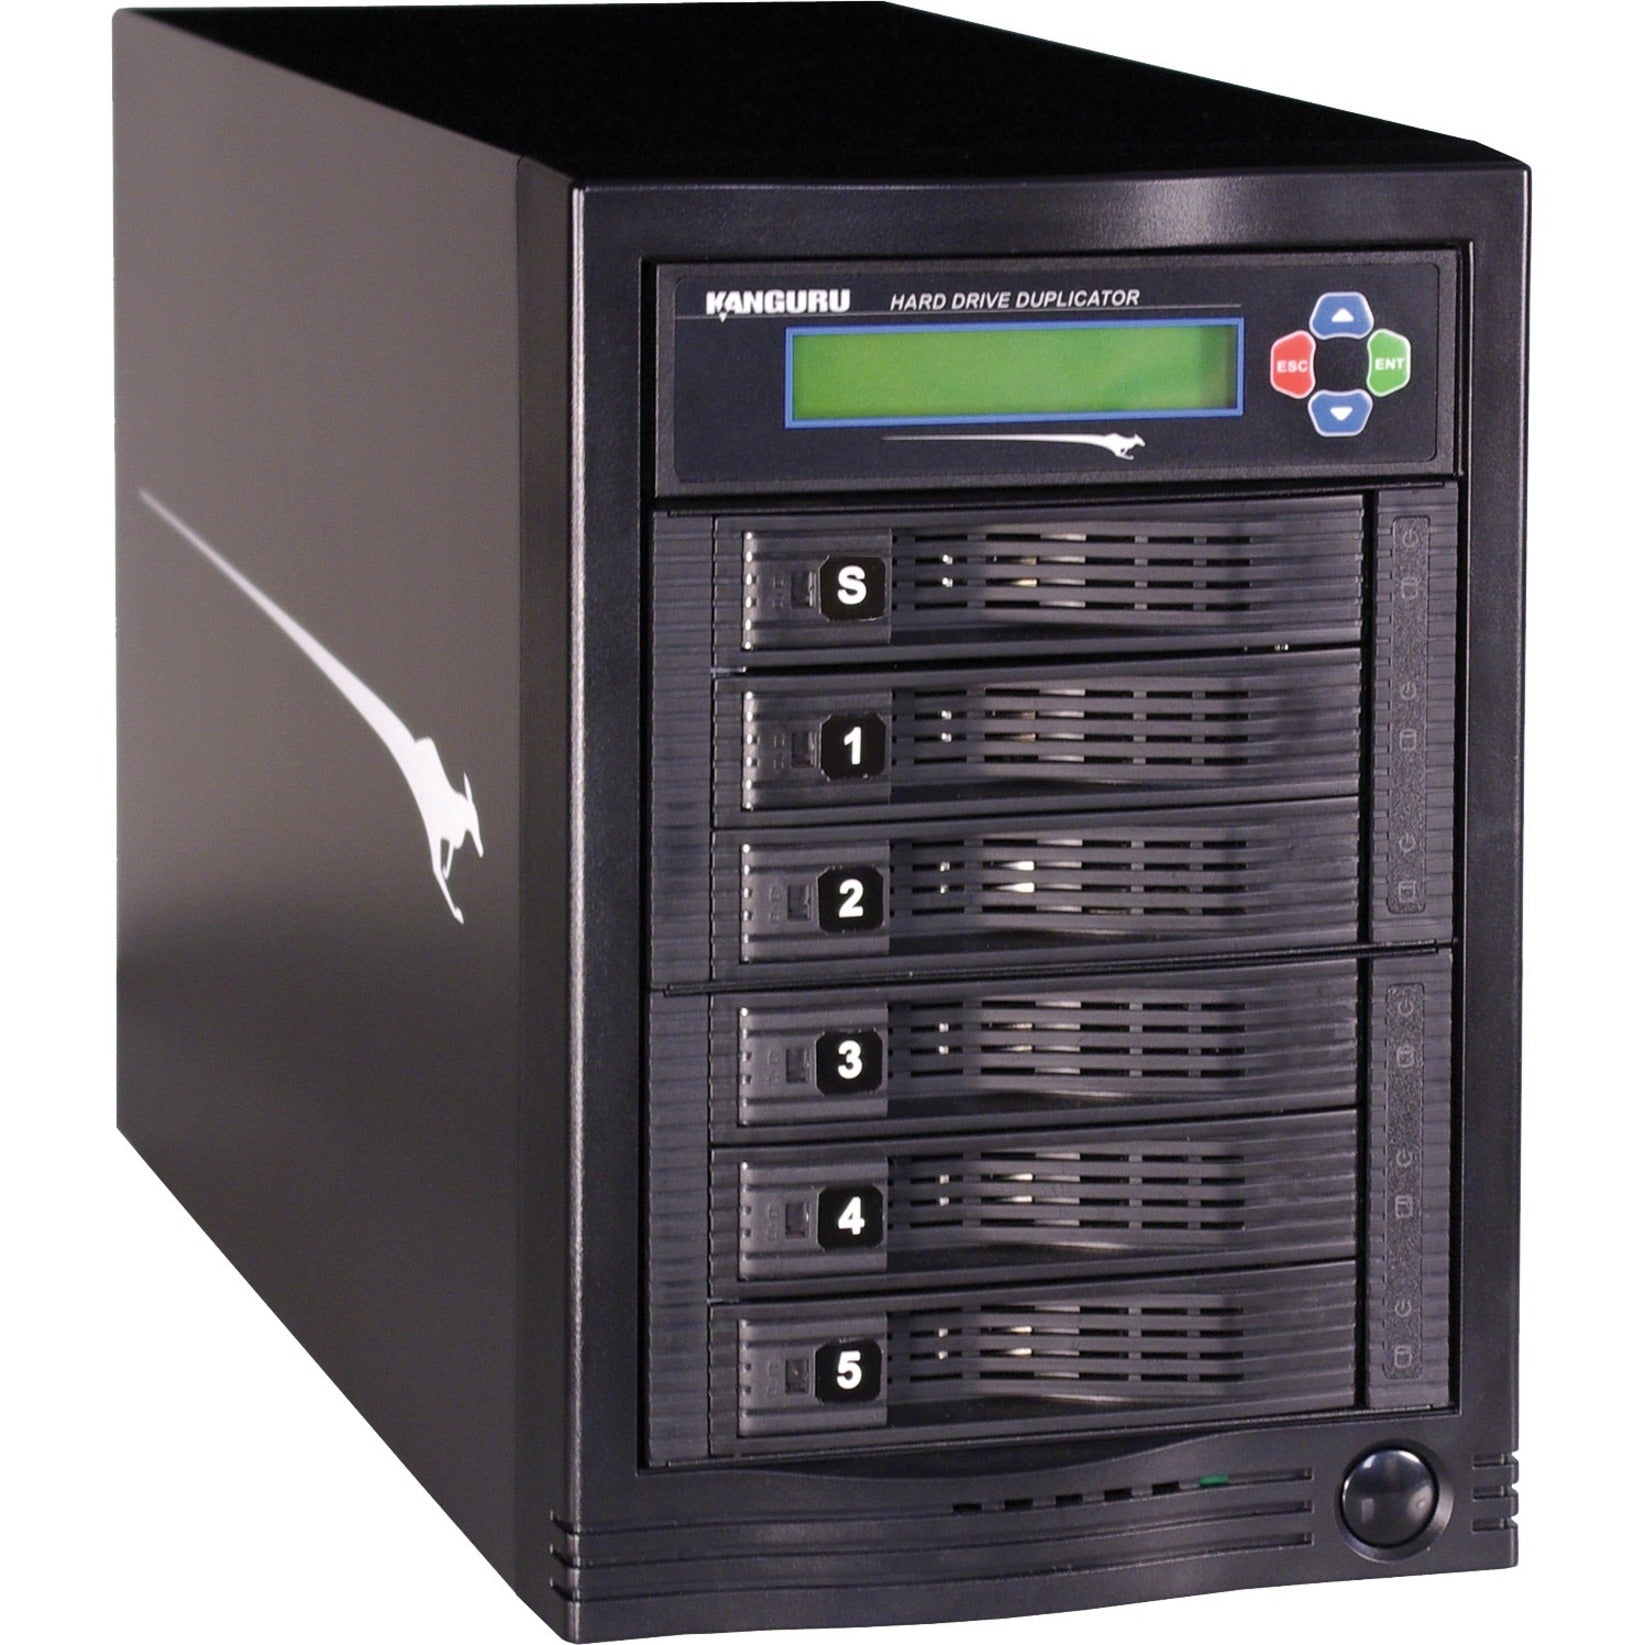 Kanguru KCLONE-5HD-TWR KanguruClone Hard Drive Duplicator 5HD Tower, Fast Transfer Rates - Up To 5GB/min, Duplicate up to 5 hard drives simultaneously, DOD Approved Disk Wipe feature (Up to 999x)